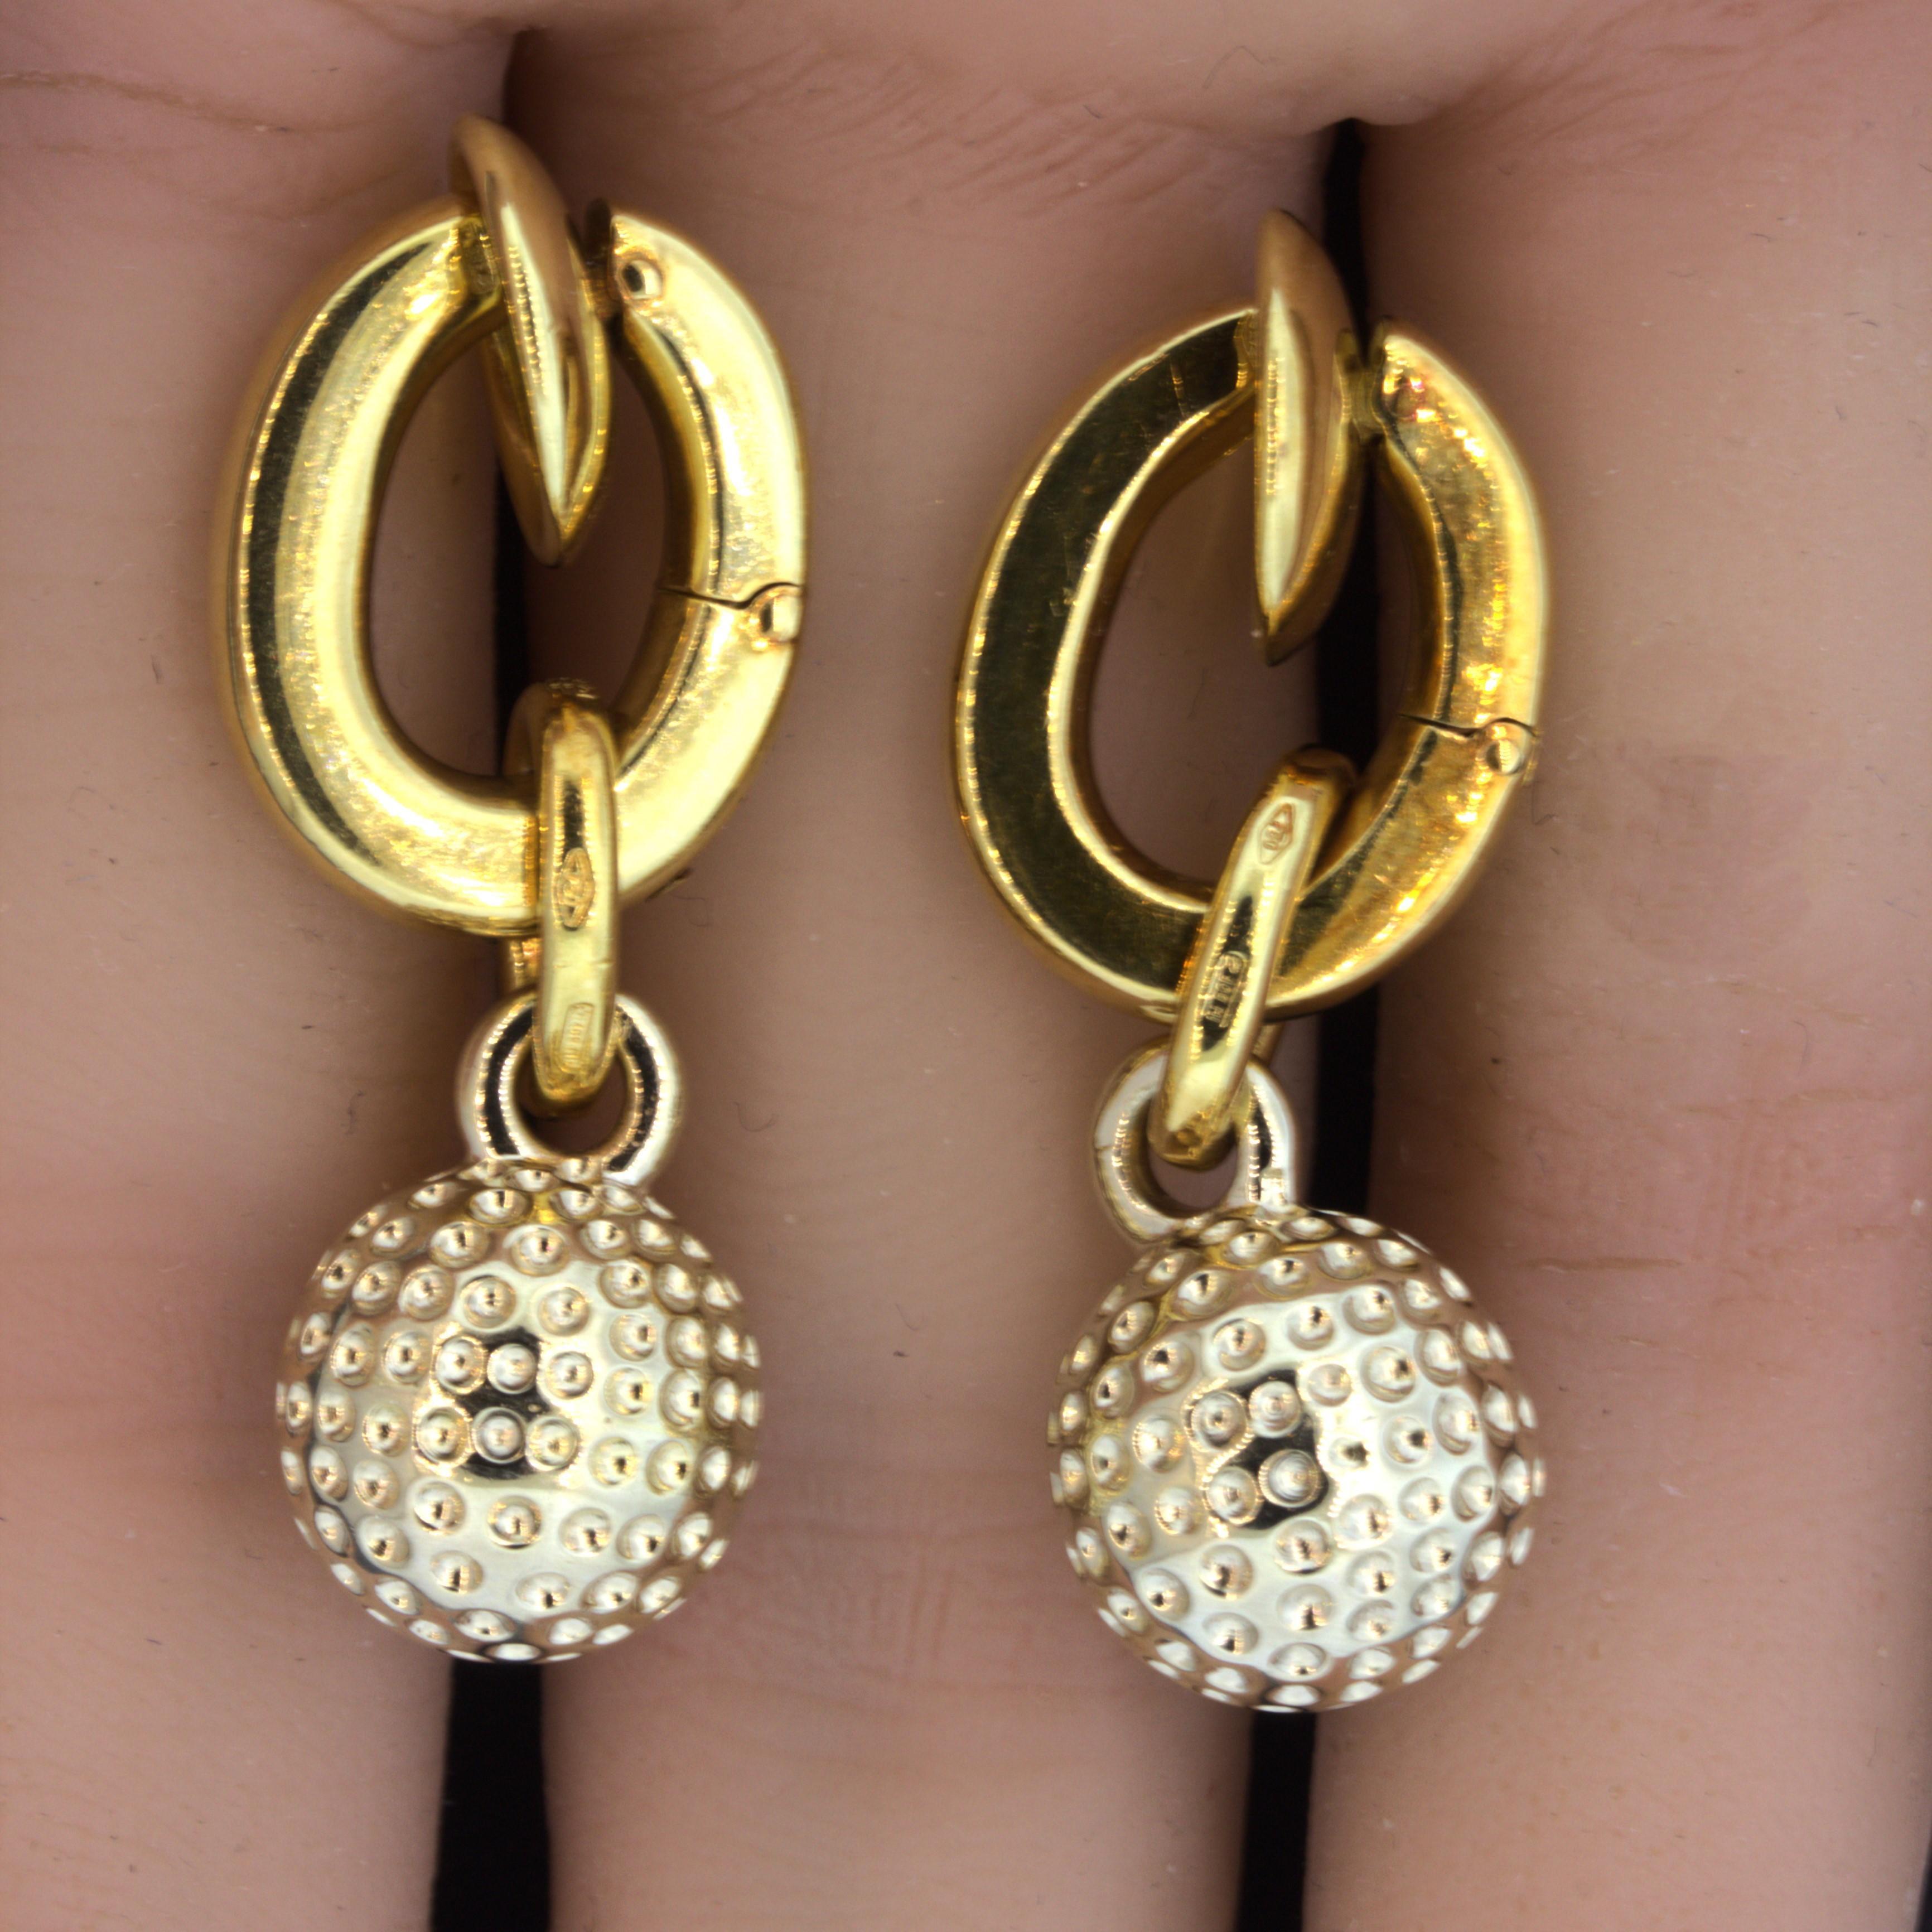 An original piece by Italian designer Pomellato. The earrings feature classic huggies which have a unique twist to them. There is a drop portion with a dotted gold sphere that dangles from the huggies. Made in 18k yellow gold and signed Pomellato,